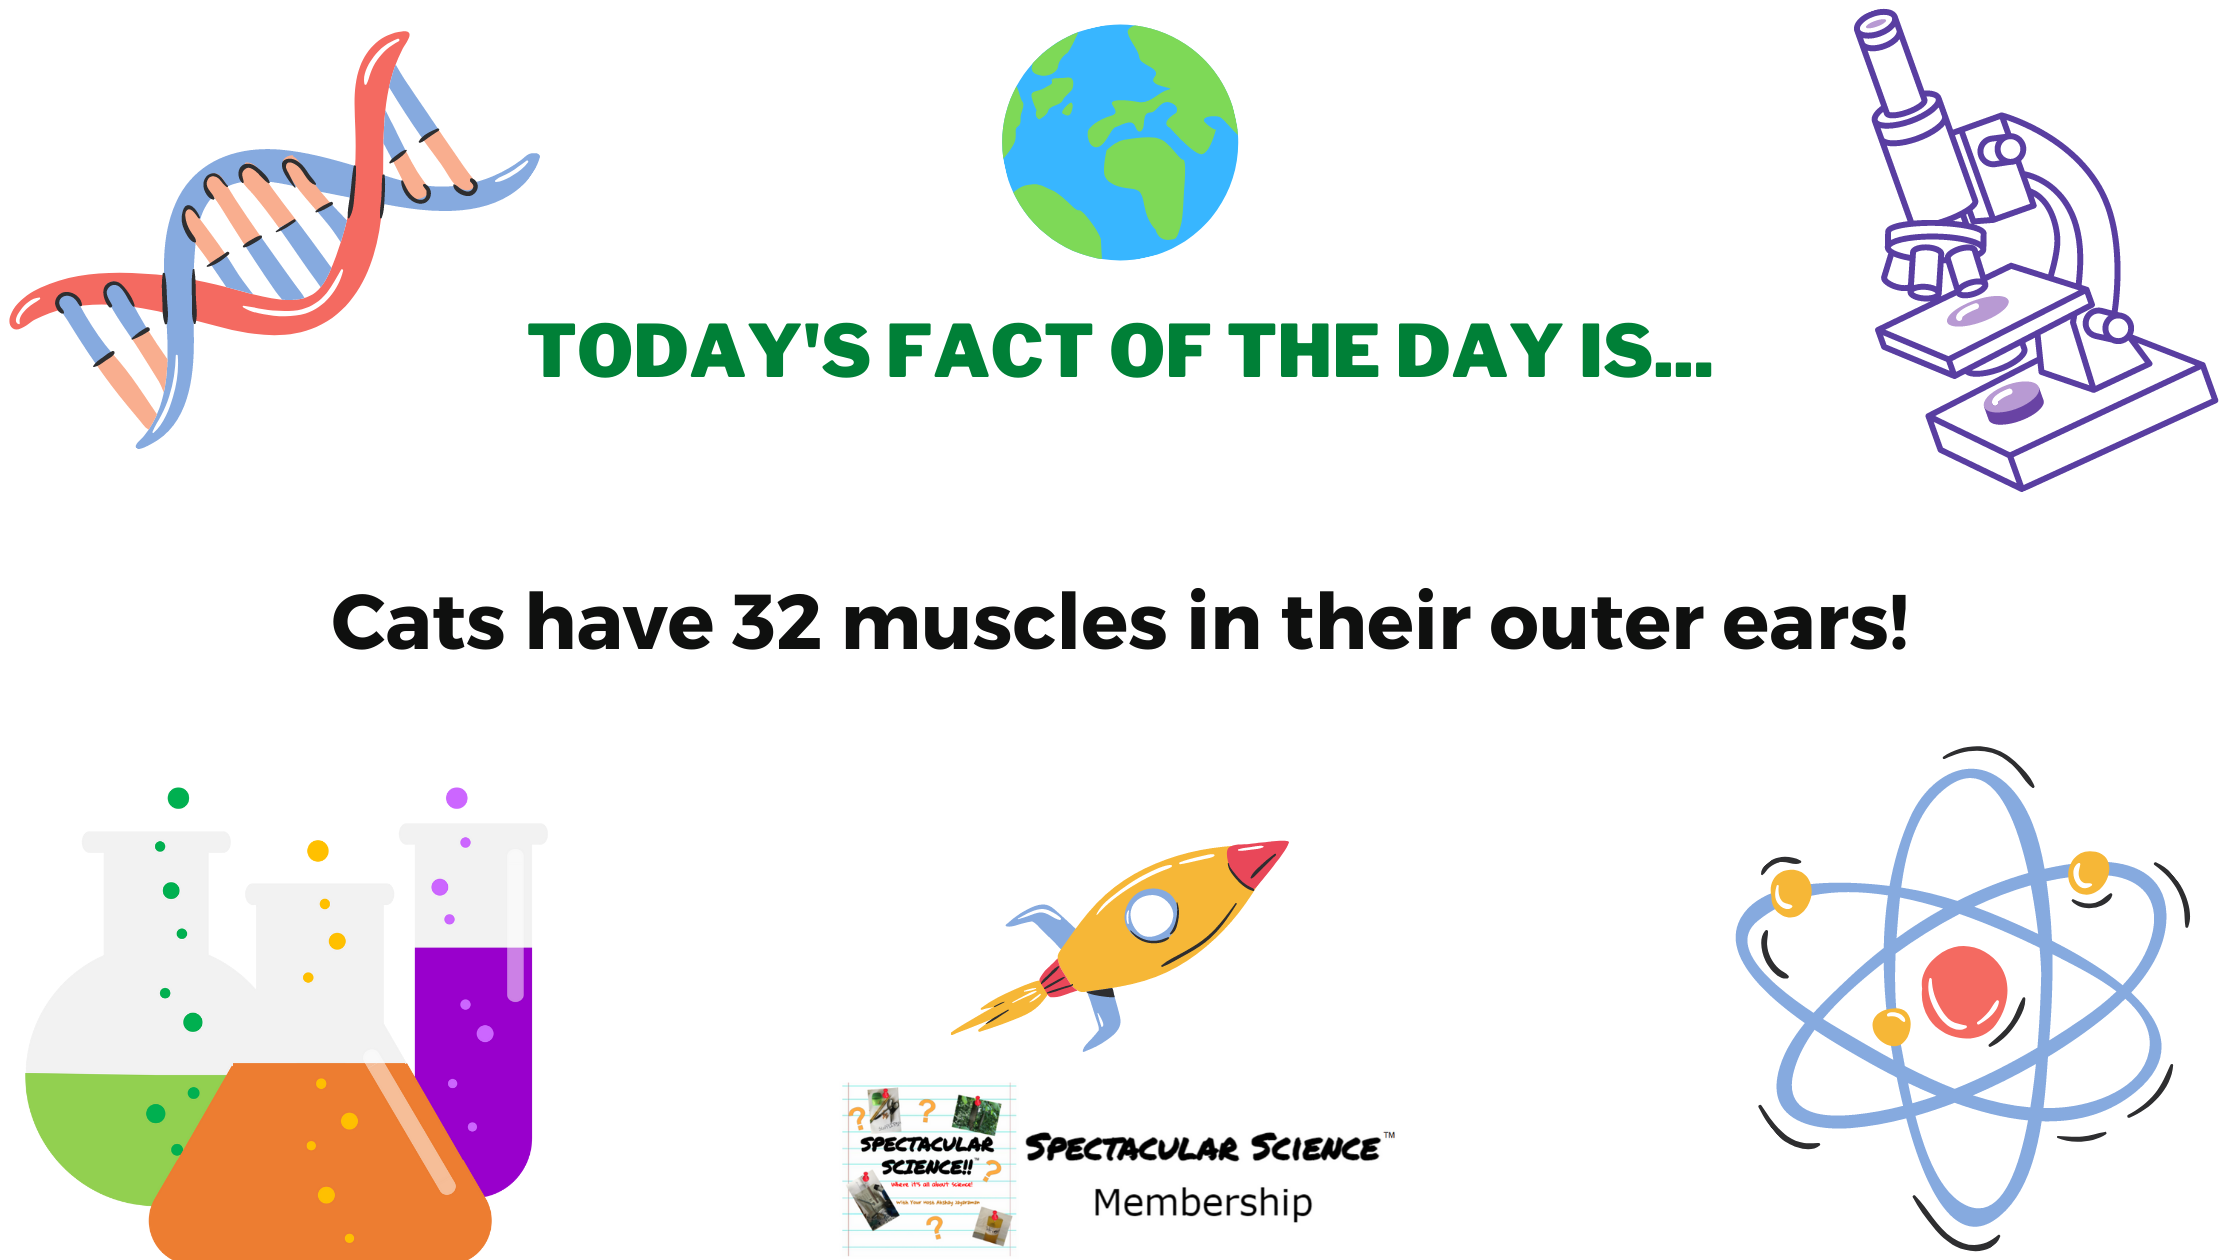 Fact of the Day Image June 19th